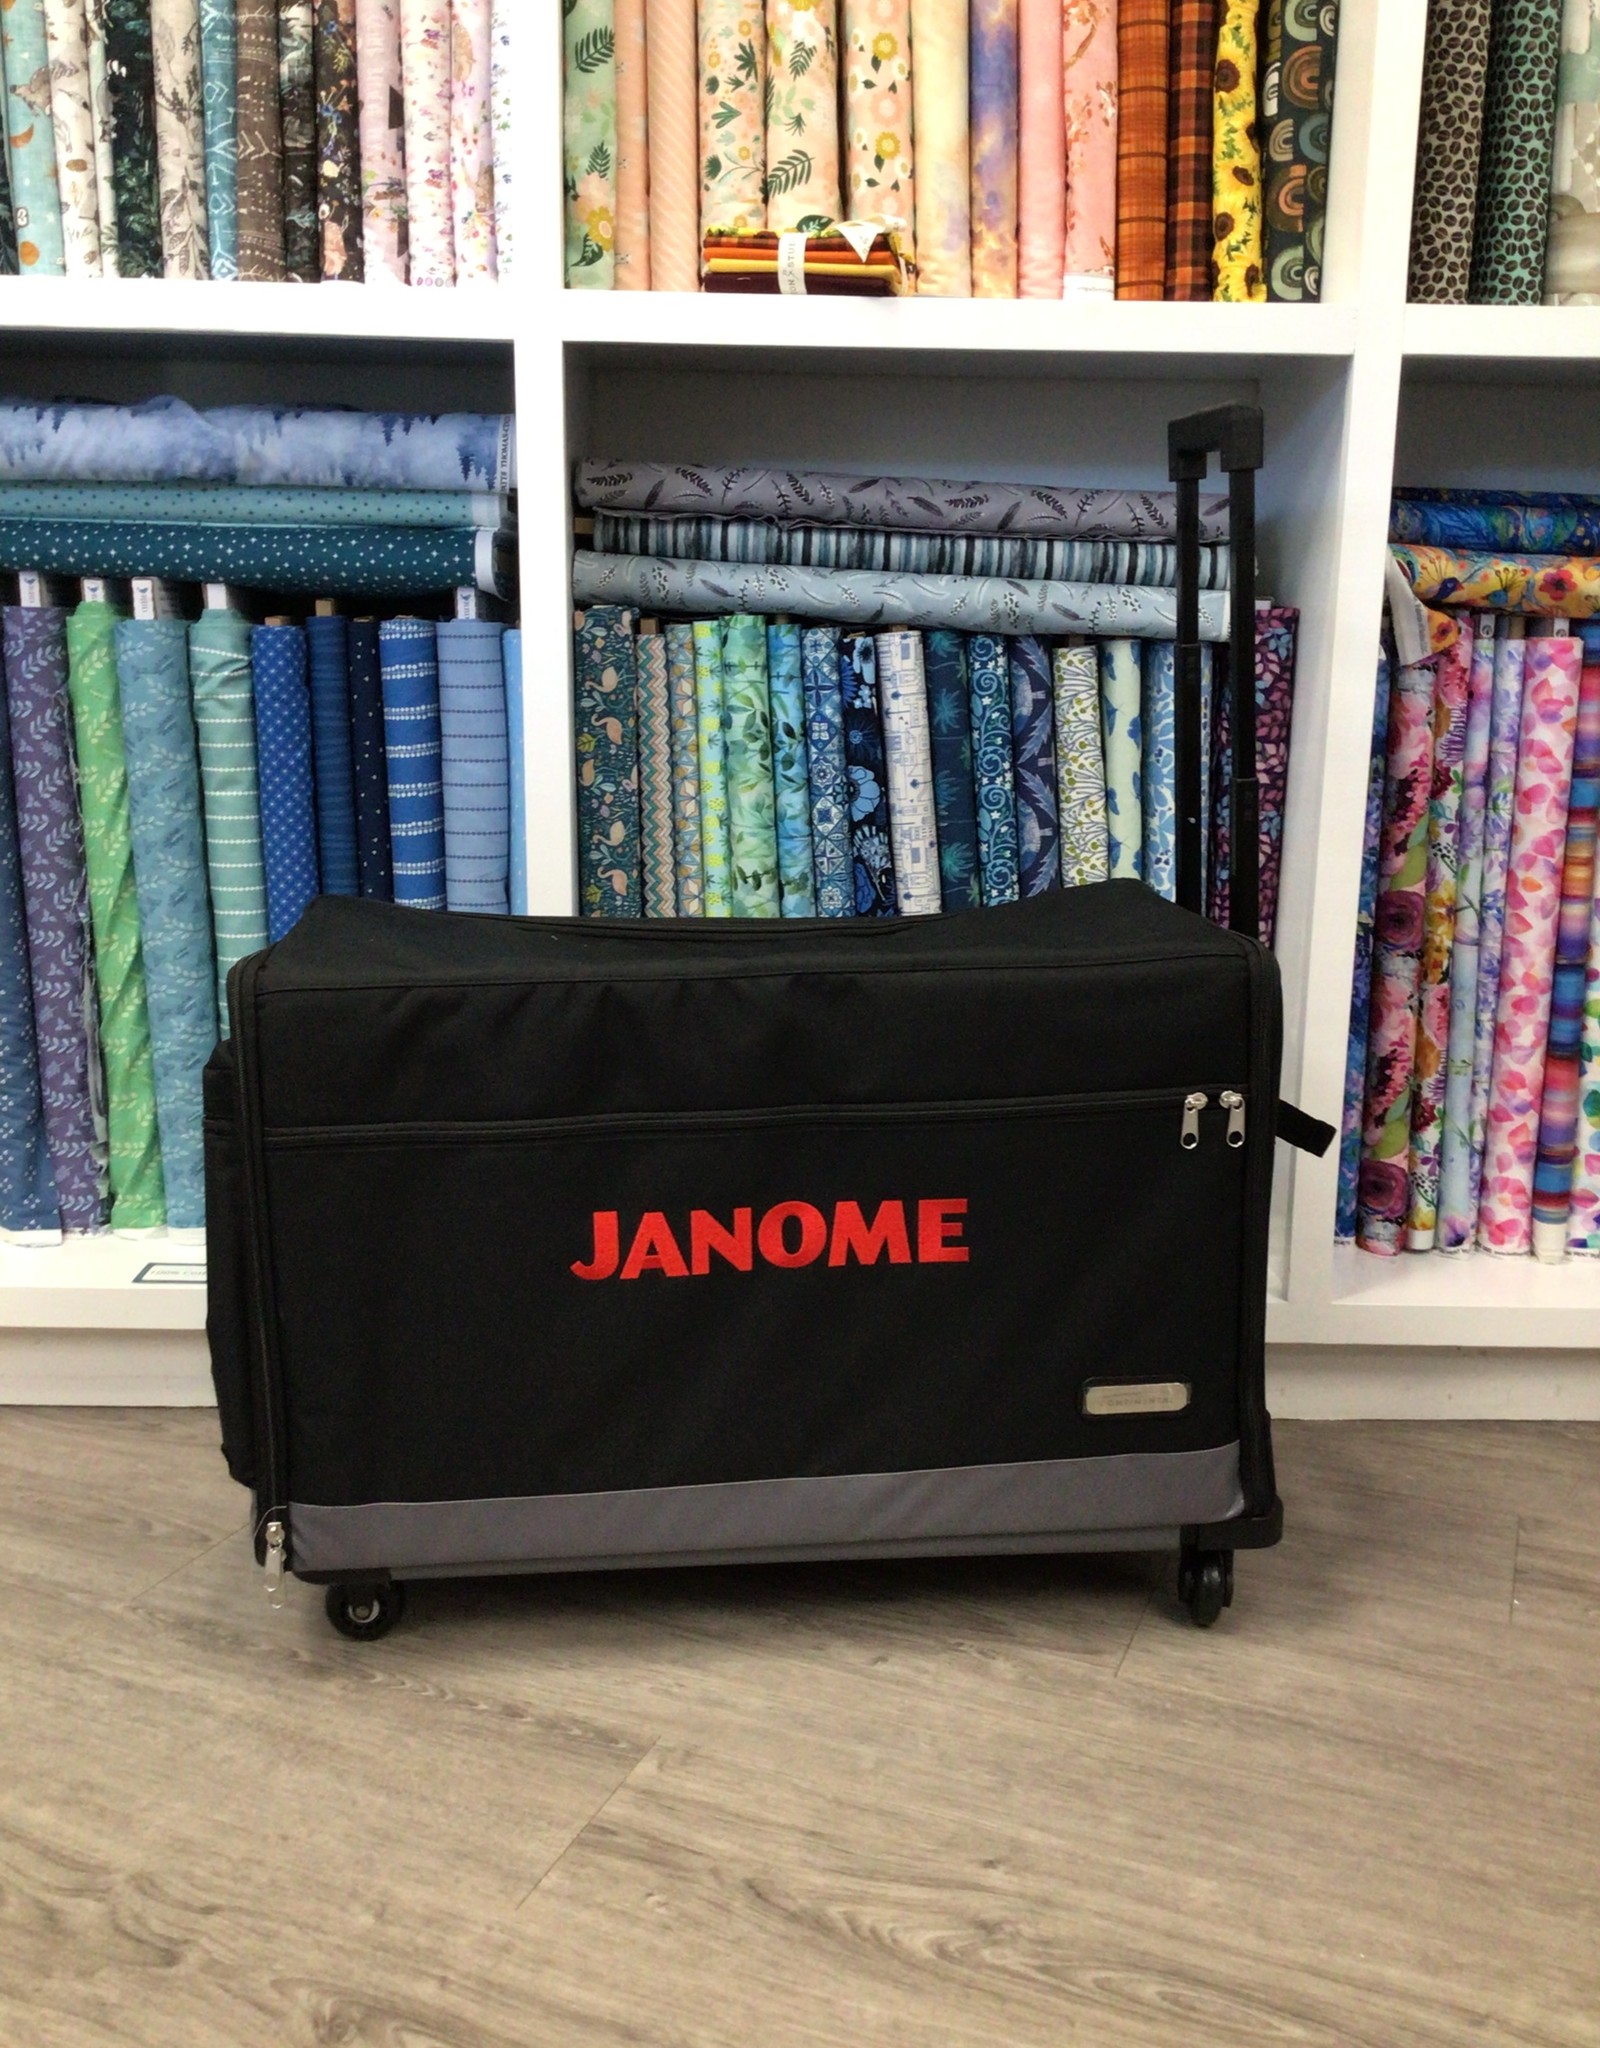 Janome Janome Rolling Carry Case   11.5" x 25.5" x 16"